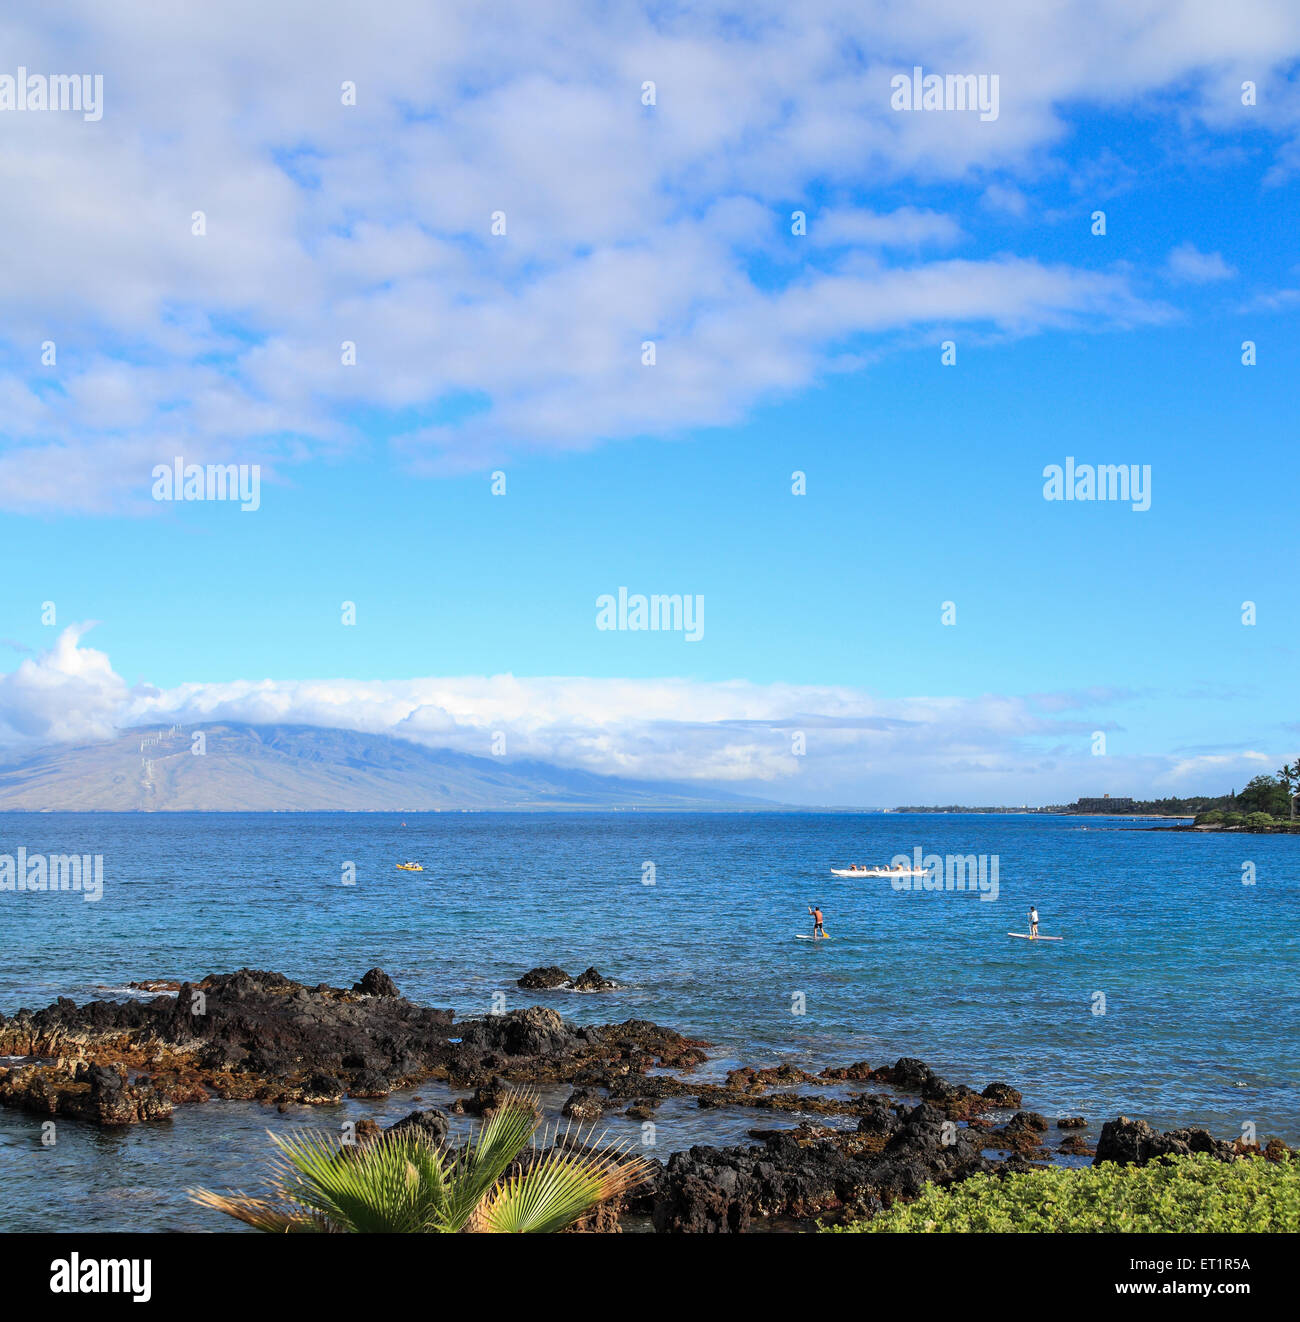 Stand up paddleboarders, kayakers and outrigger canoe tour off Wailea Beach, Maui, as viewed from the beach walk Stock Photo